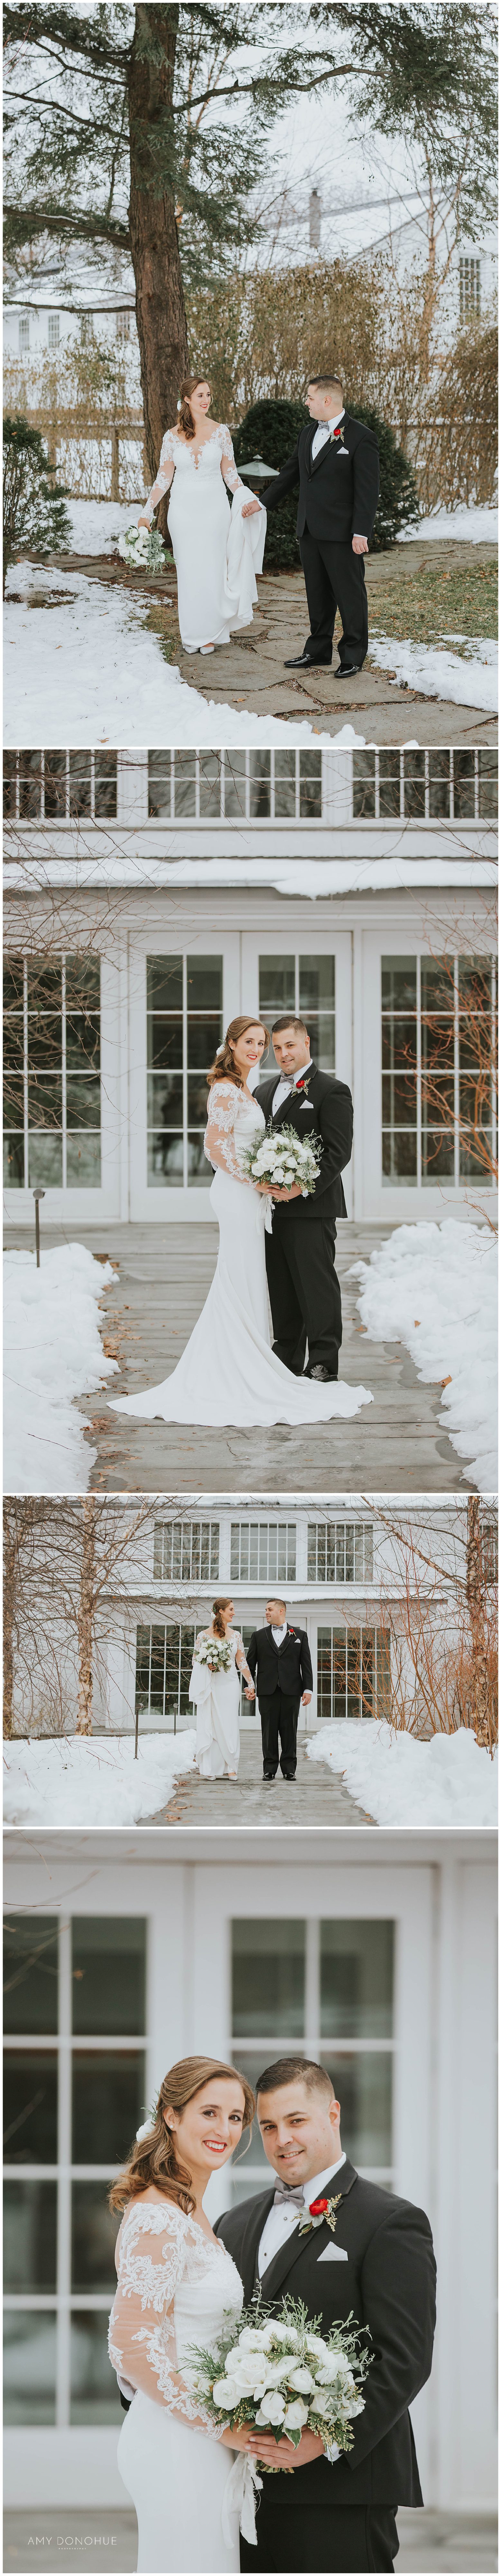 Natural Bride and Groom Portraits | Woodstock Inn & Resort | VT Wedding Photographer | © Amy Donohue Photography